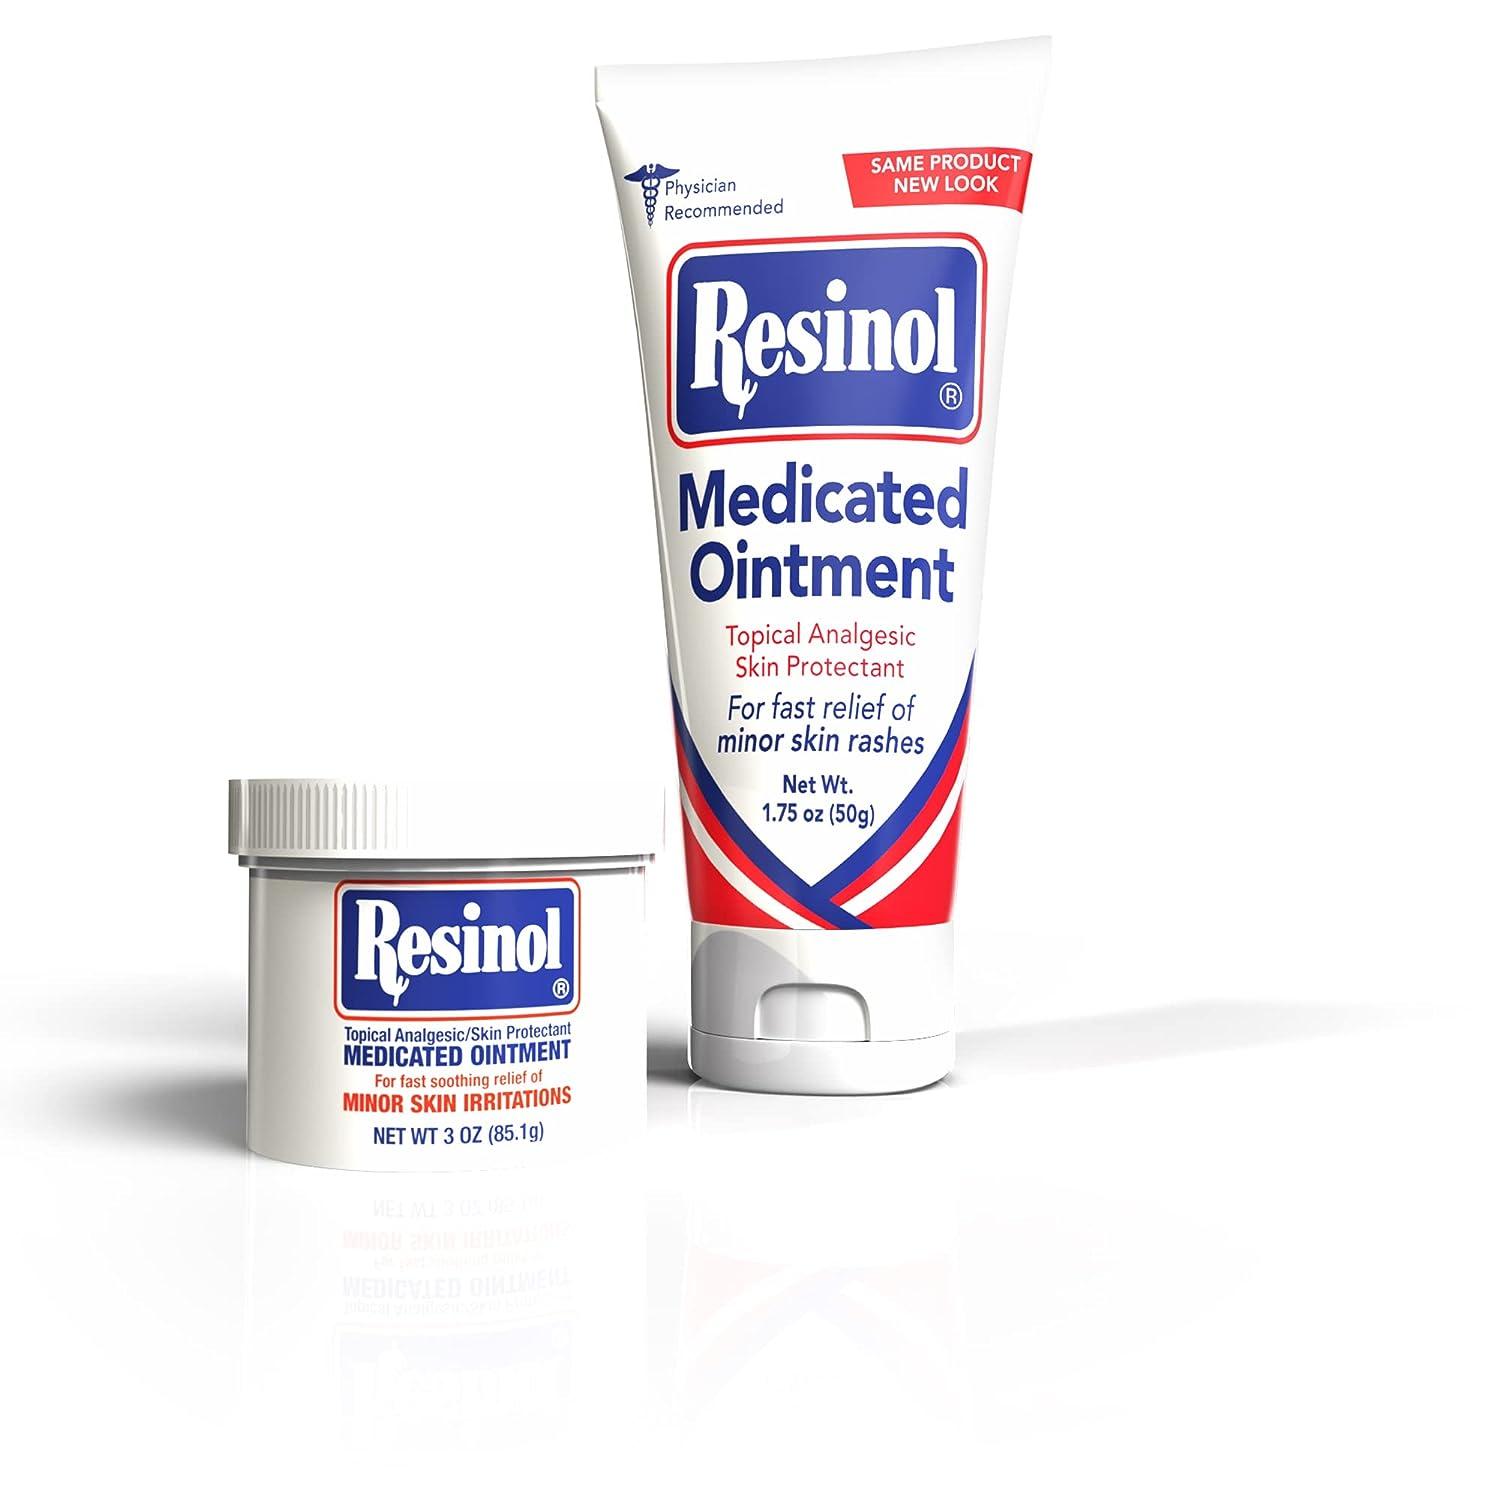 Resinol Medicated Ointment with Zinc Oxide for Pain Relief